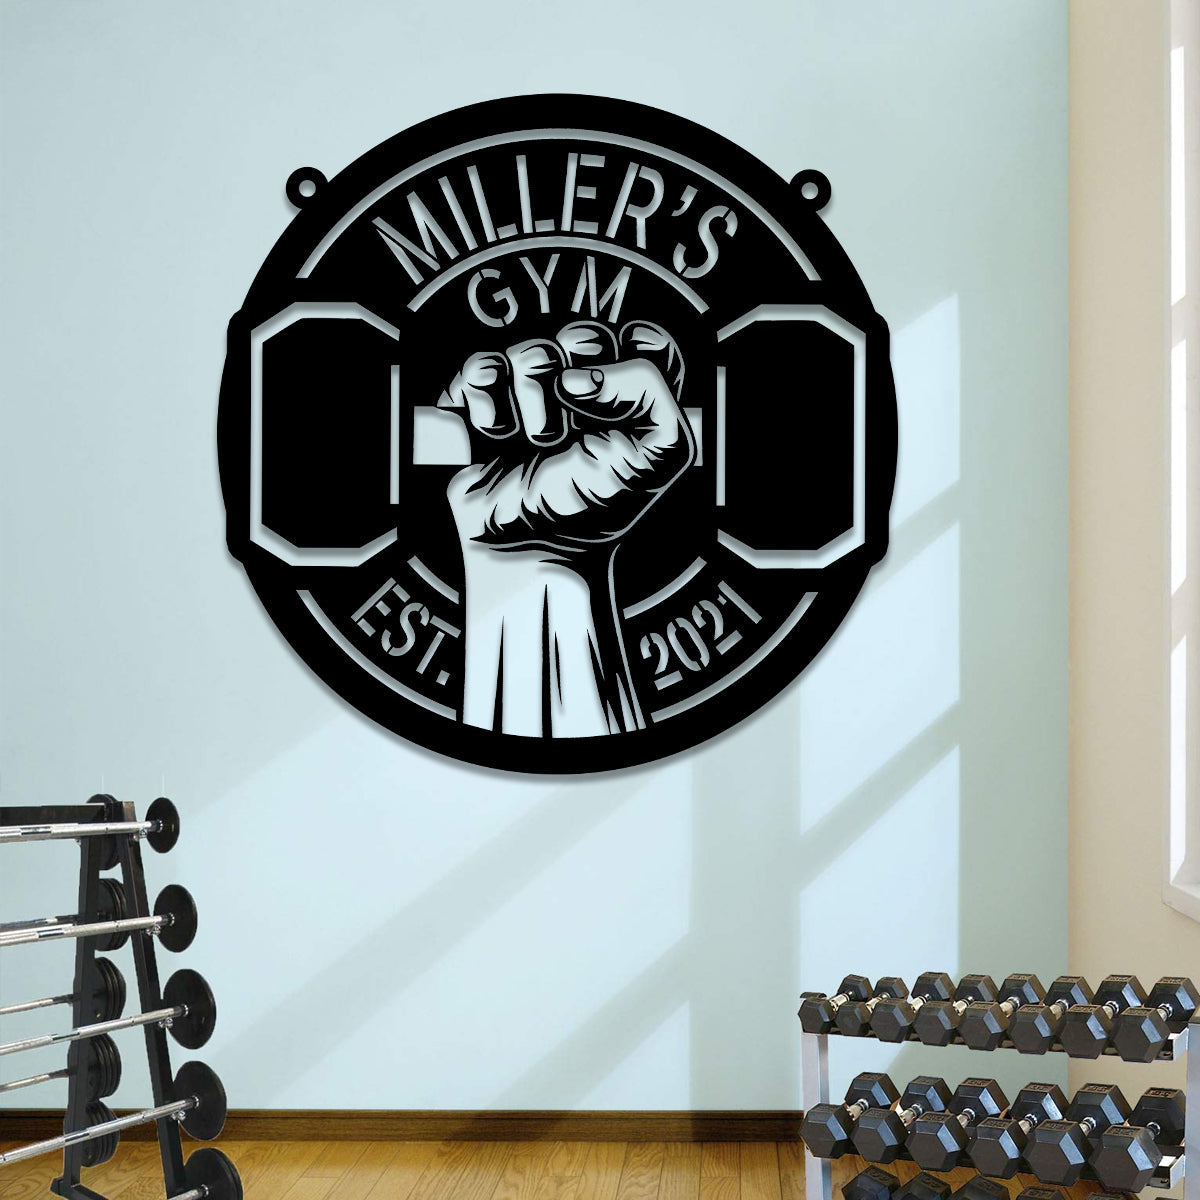 Personalized Metal Gym Sign, Custom Fitness Center, Cross Fit Club, Home Wall Decor